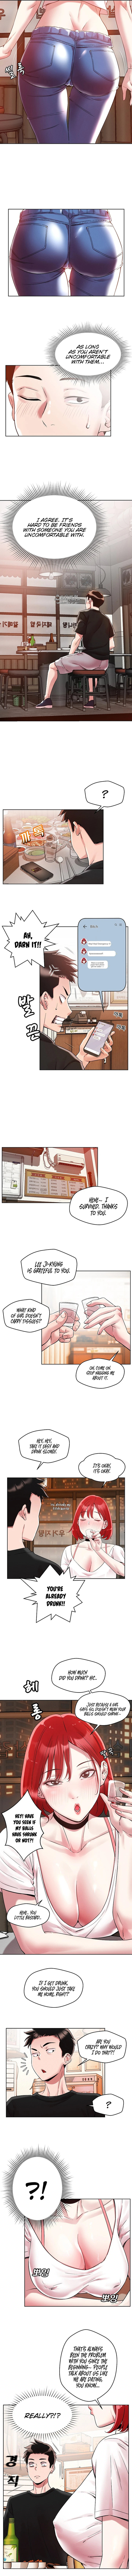 How did we get here Lee Ji-Kyung - Chapter 1 Page 5